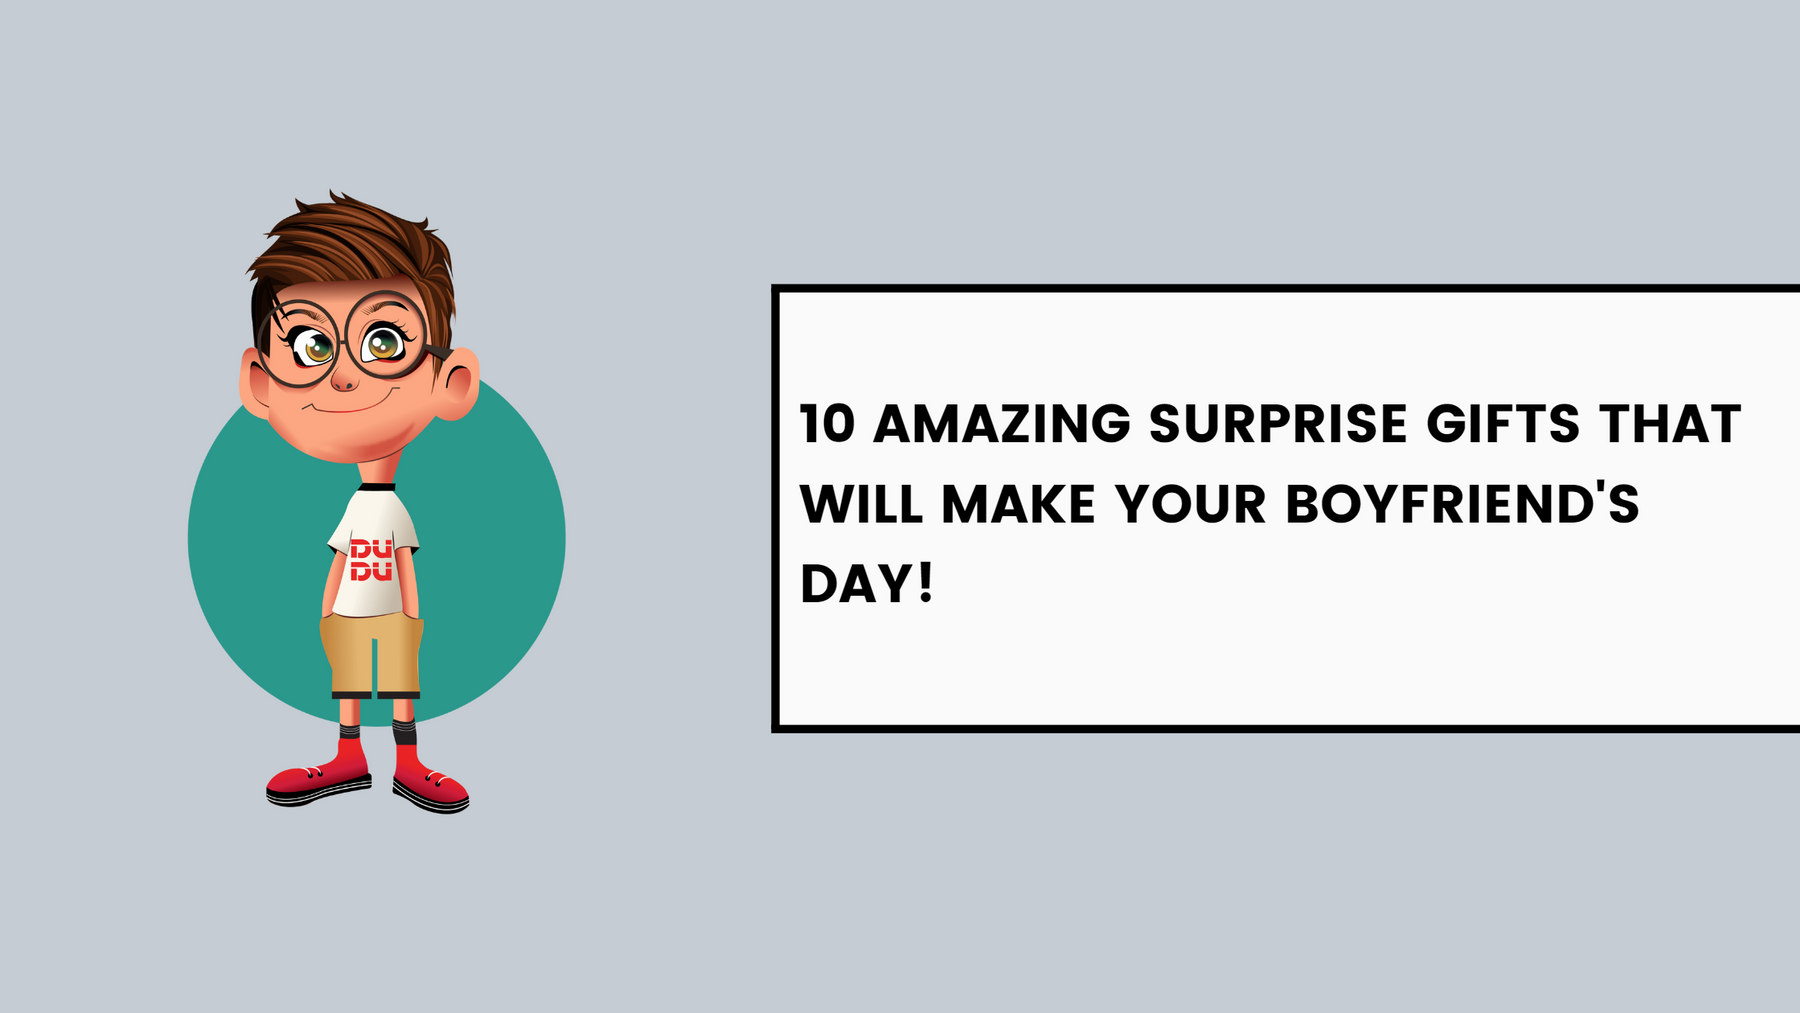 10 Amazing Surprise Gifts That Will Make Your Boyfriend's Day!